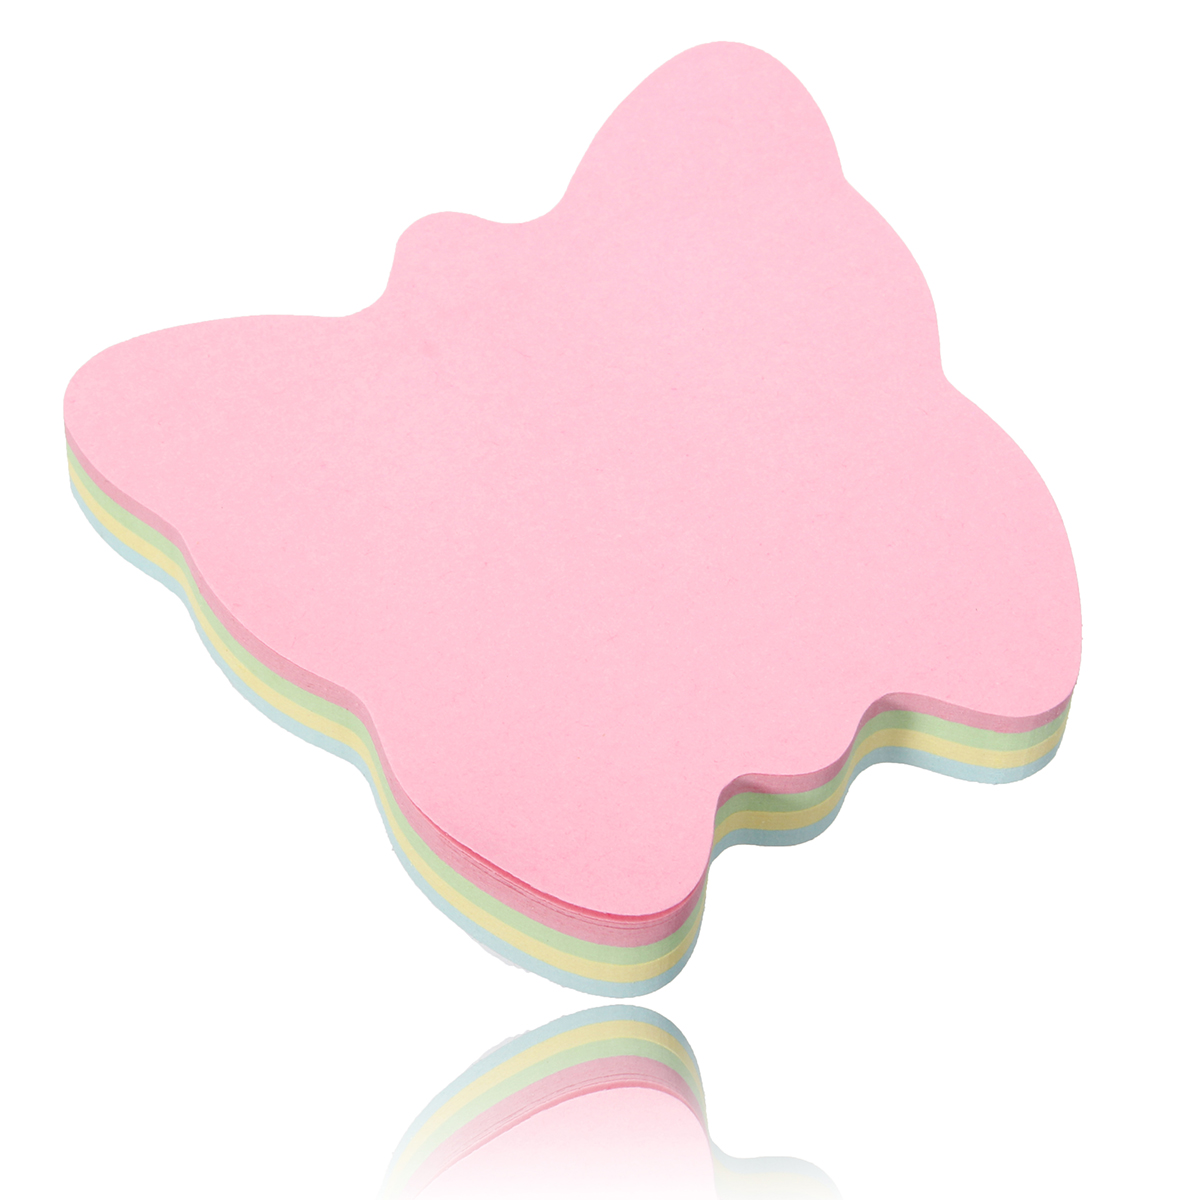 1-Pcs-Sticky-Note-Color-Post-Note-Paper-Sticker-Cute-Candy-Color-Sticky-Notes-Stationery-Papers-Book-1462369-3